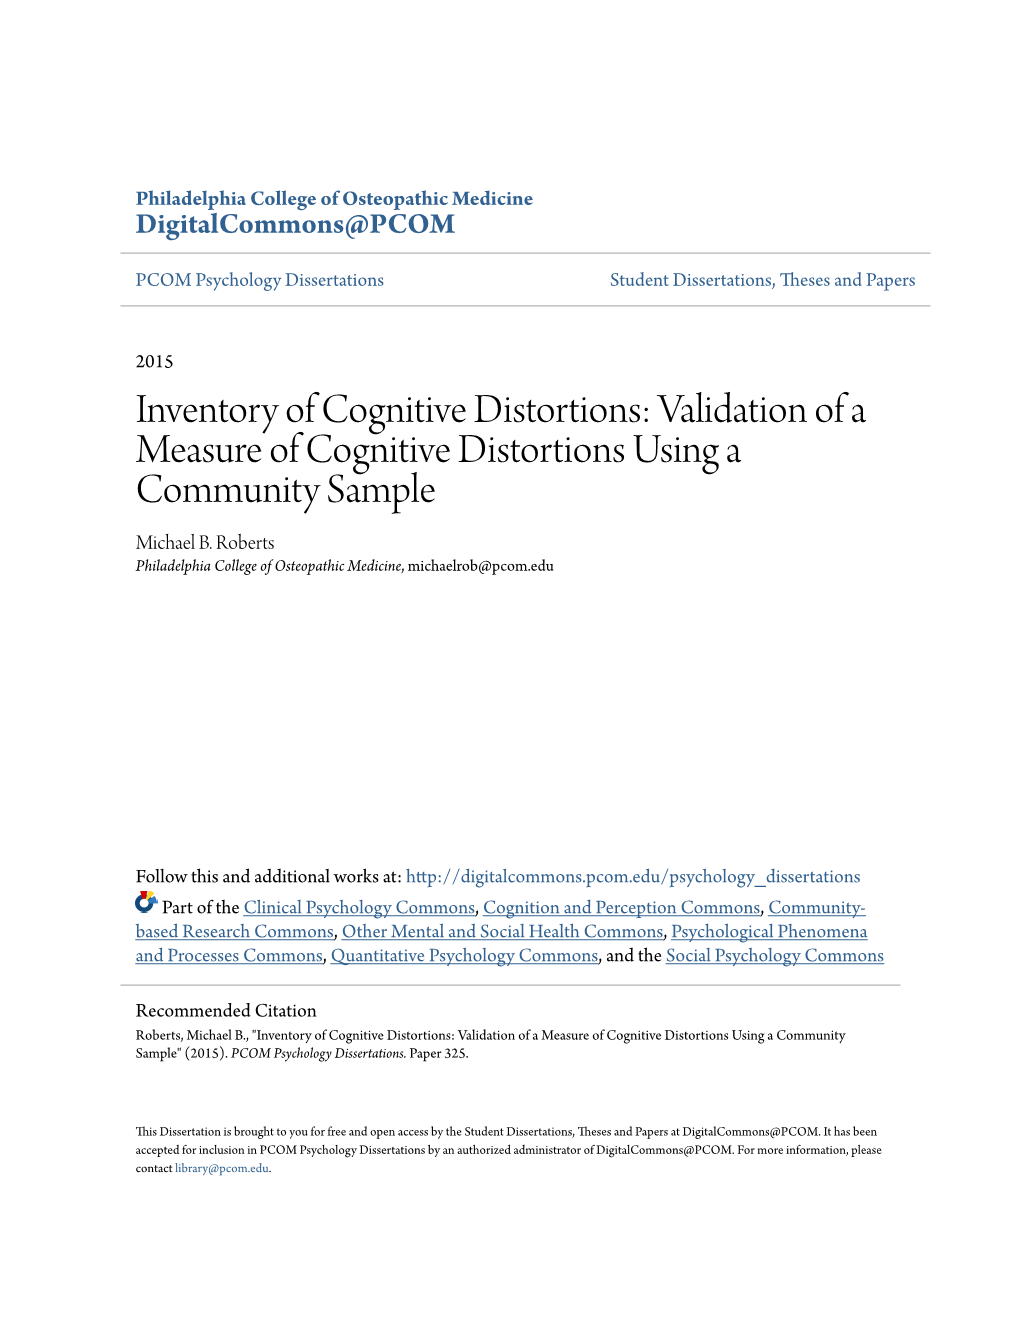 Inventory of Cognitive Distortions: Validation of a Measure of Cognitive Distortions Using a Community Sample Michael B